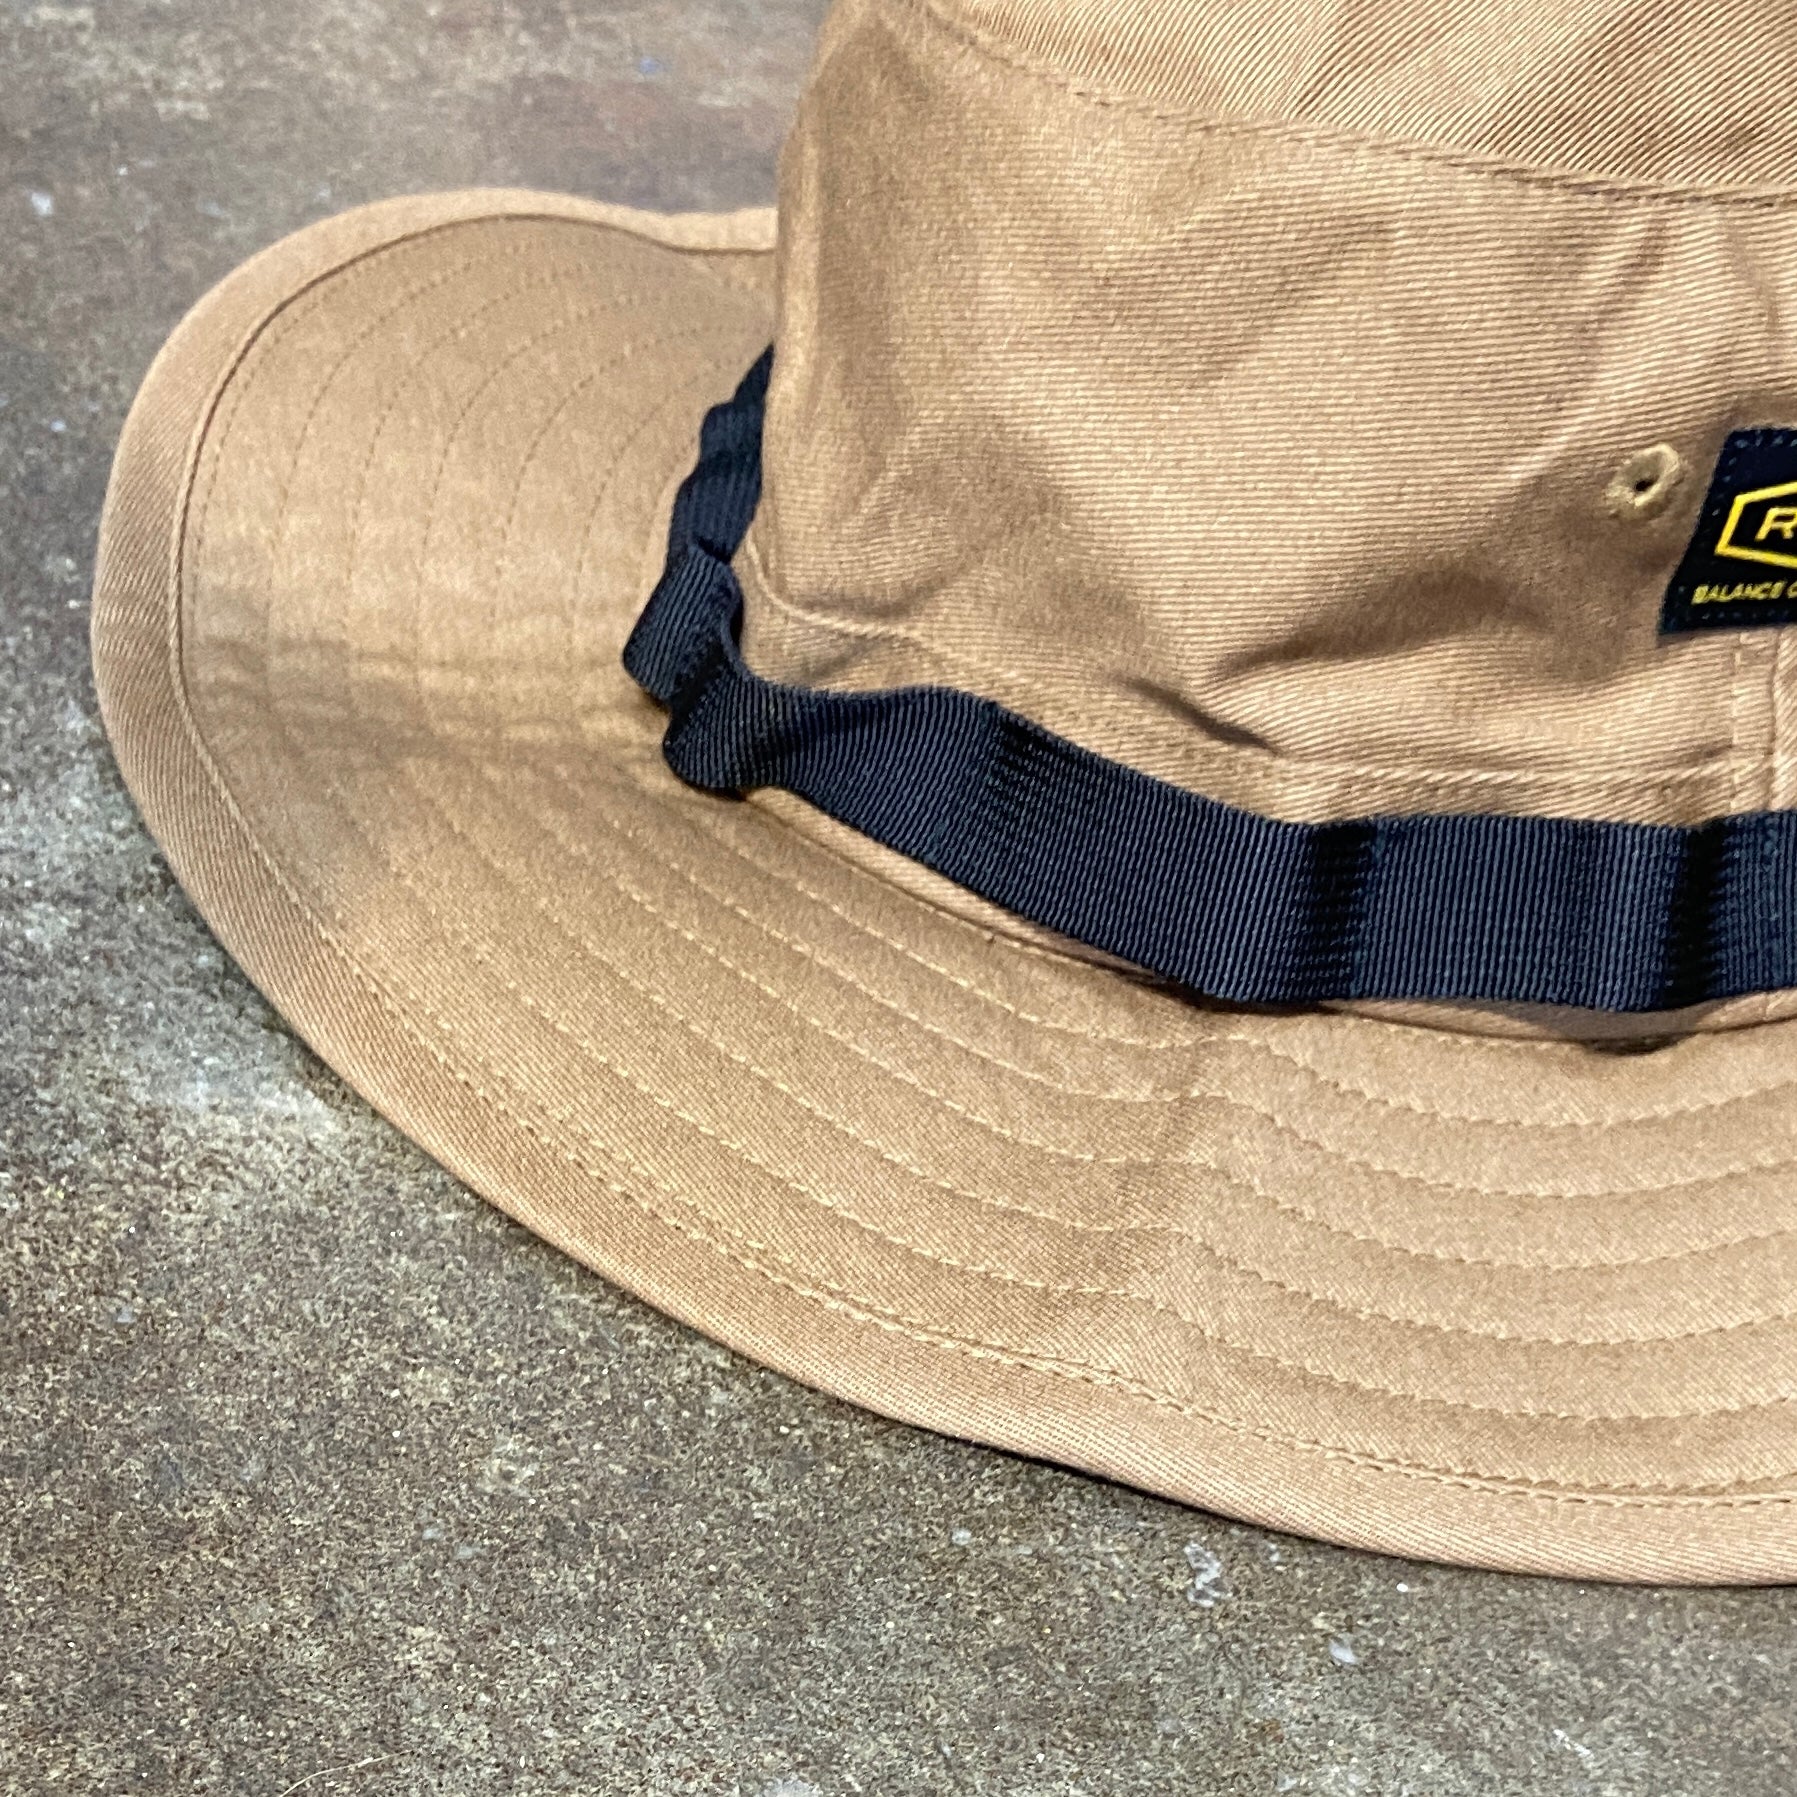 RVCA DAY SHIFT BOONIE HAT AT KEEP IT SIMPLE SURF STORE IN CAPE TOWN